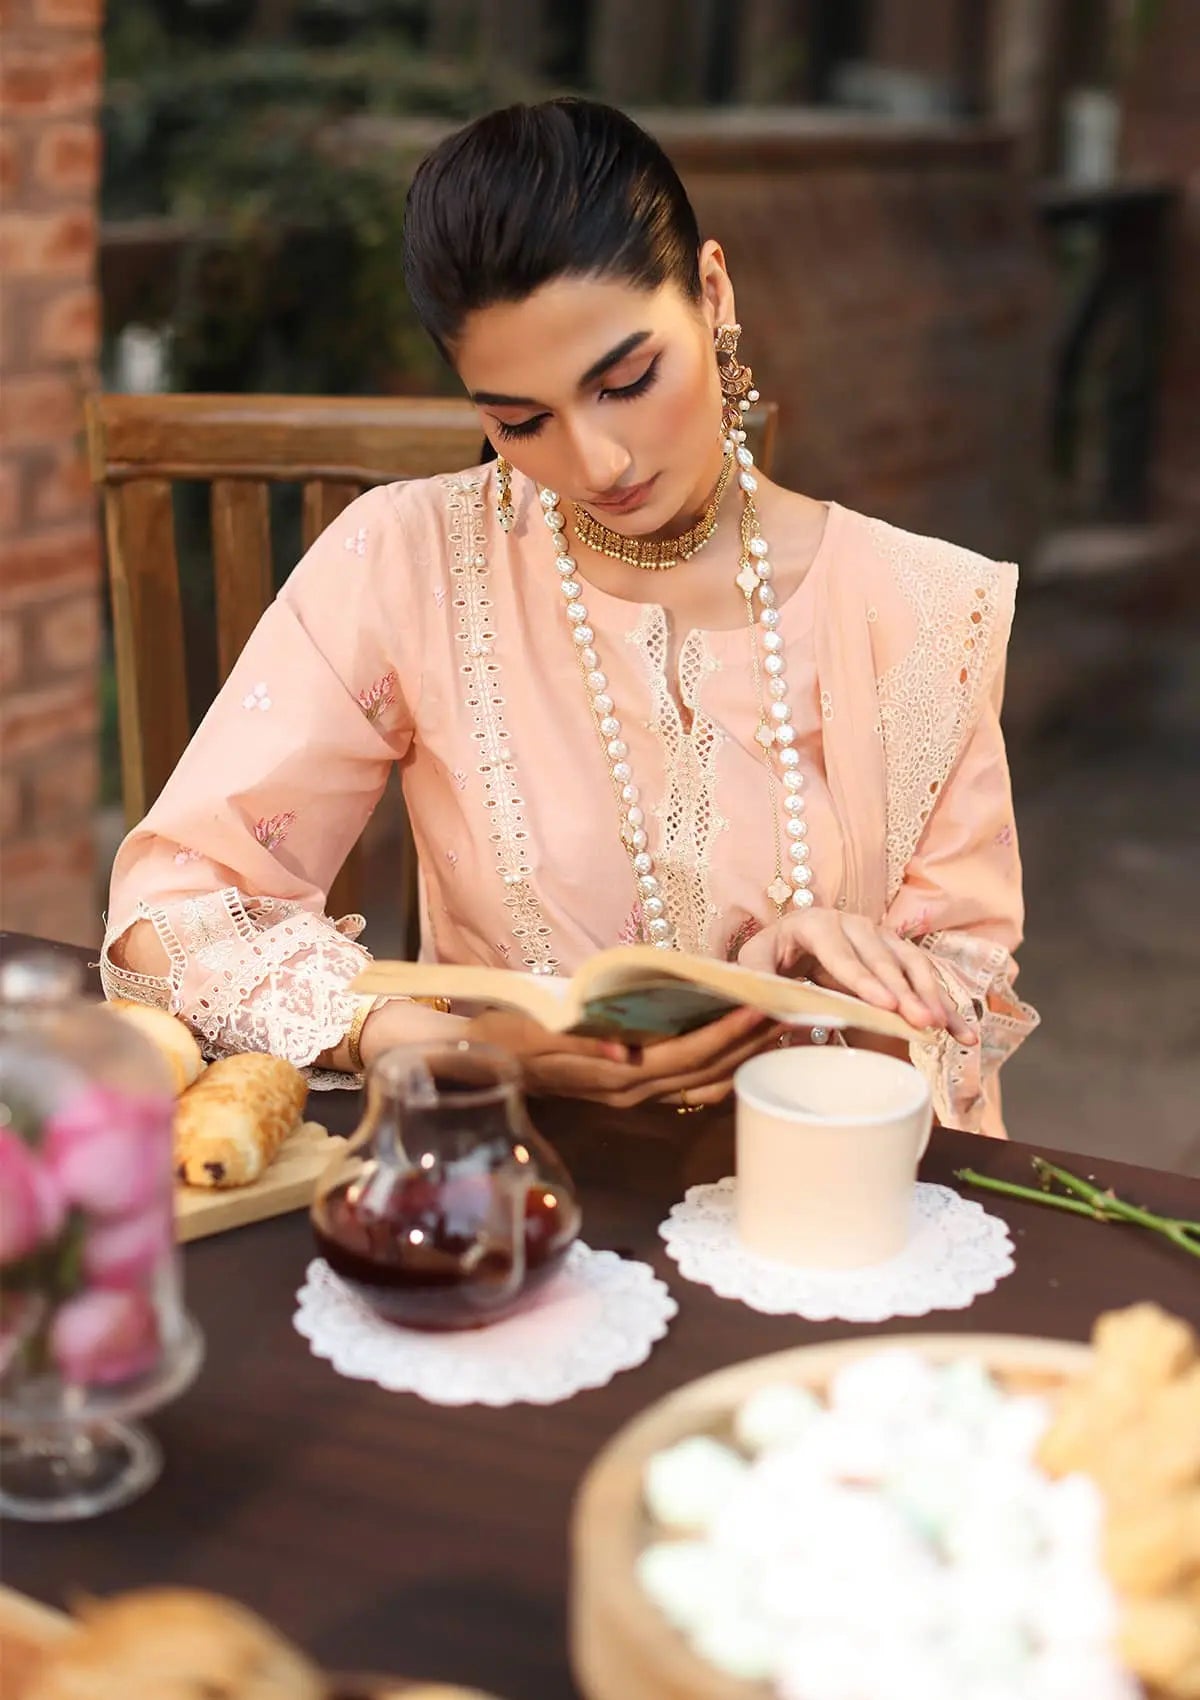 Light Pink Semi-stitched embroidery Suit